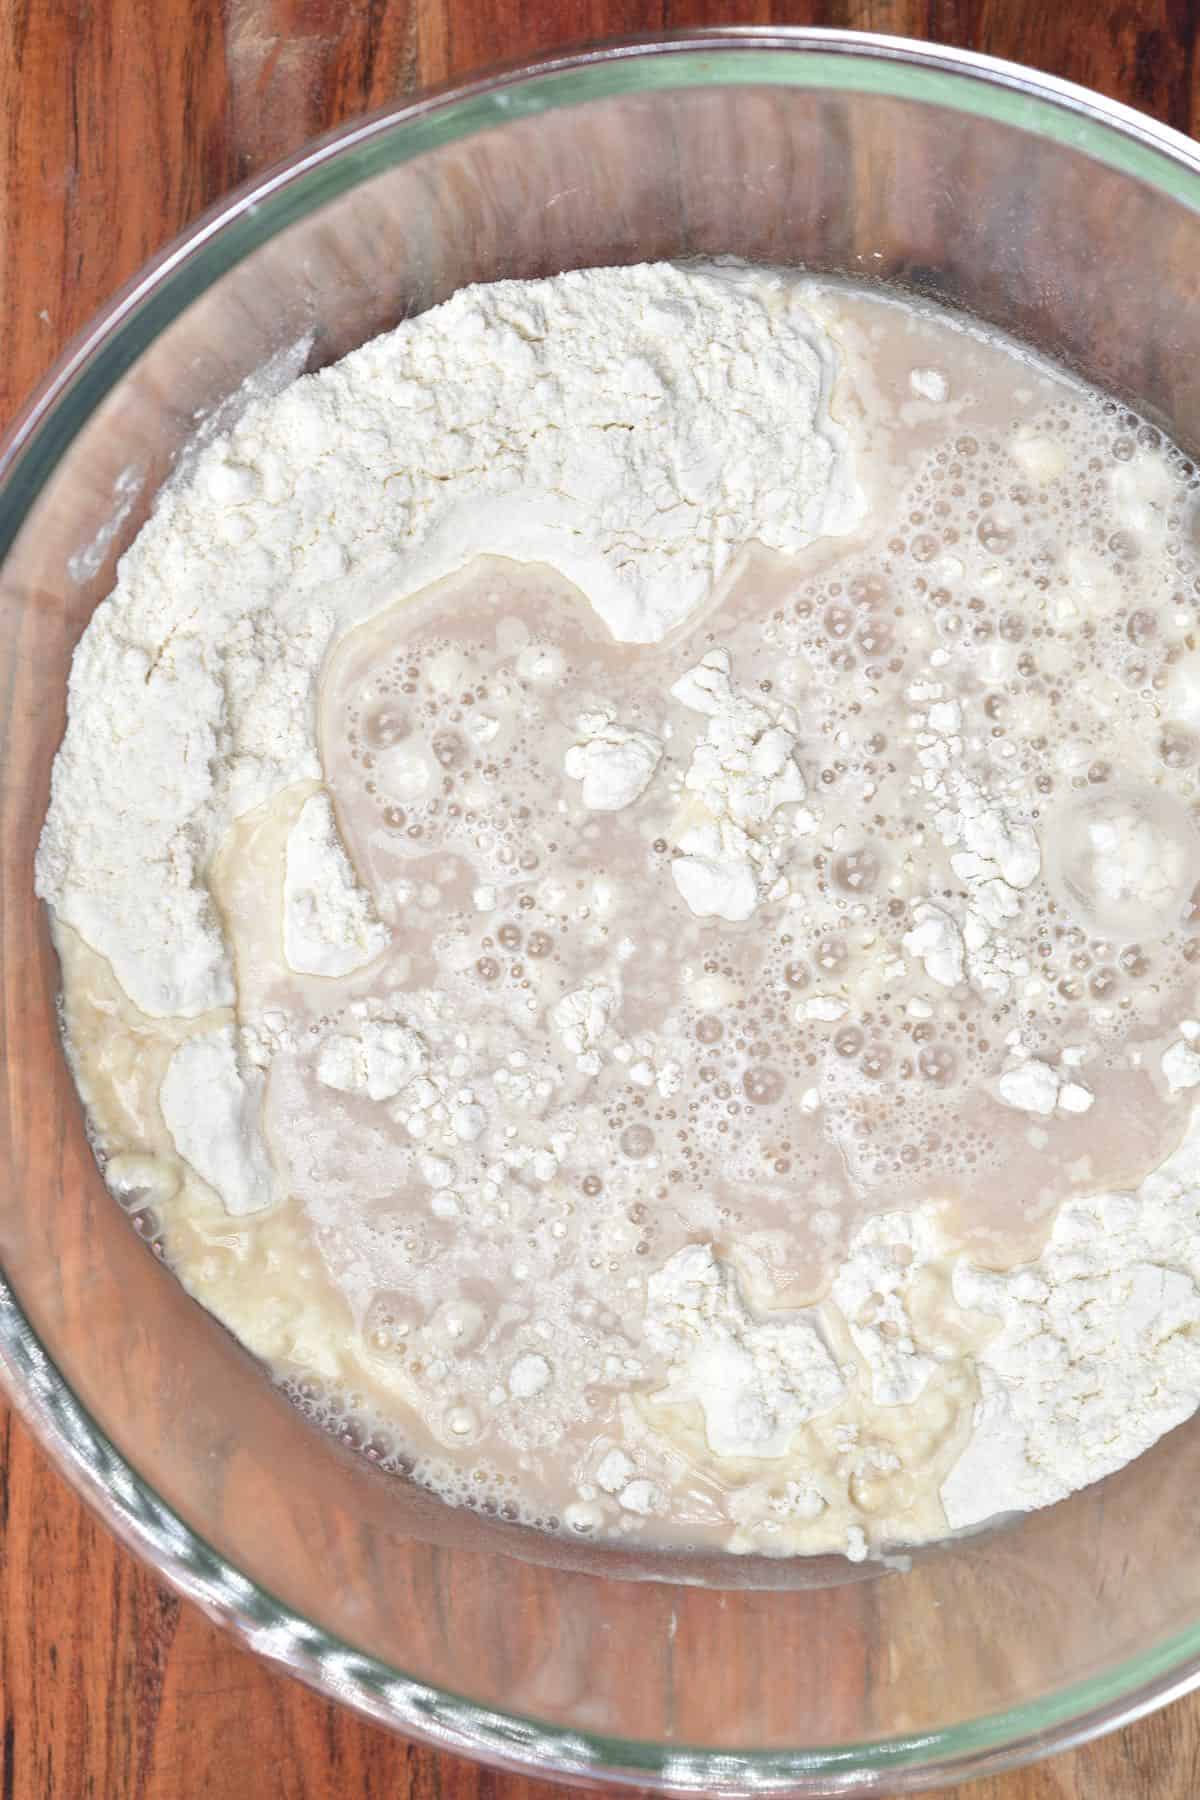 Flour and yeast in a bowl